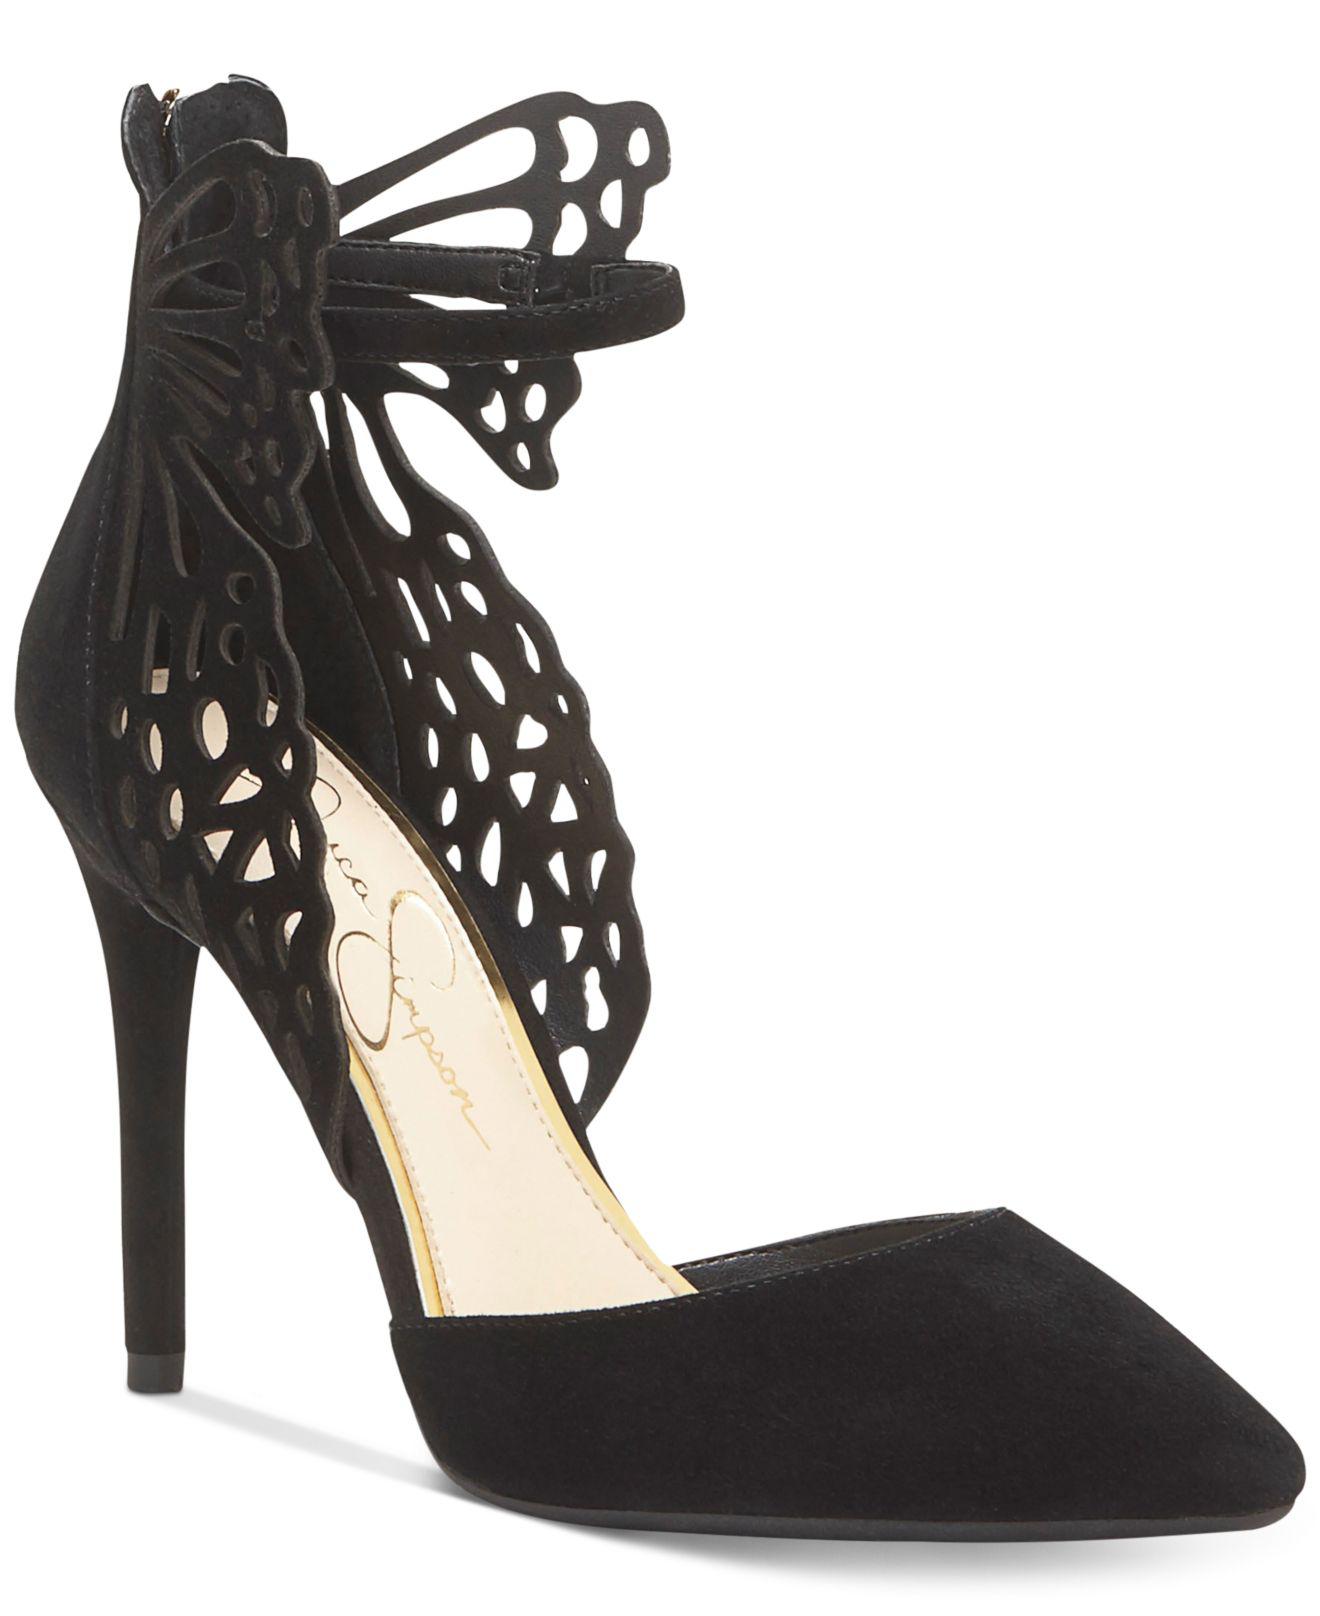 Jessica Simpson Leasia Butterfly Pumps in Black | Lyst